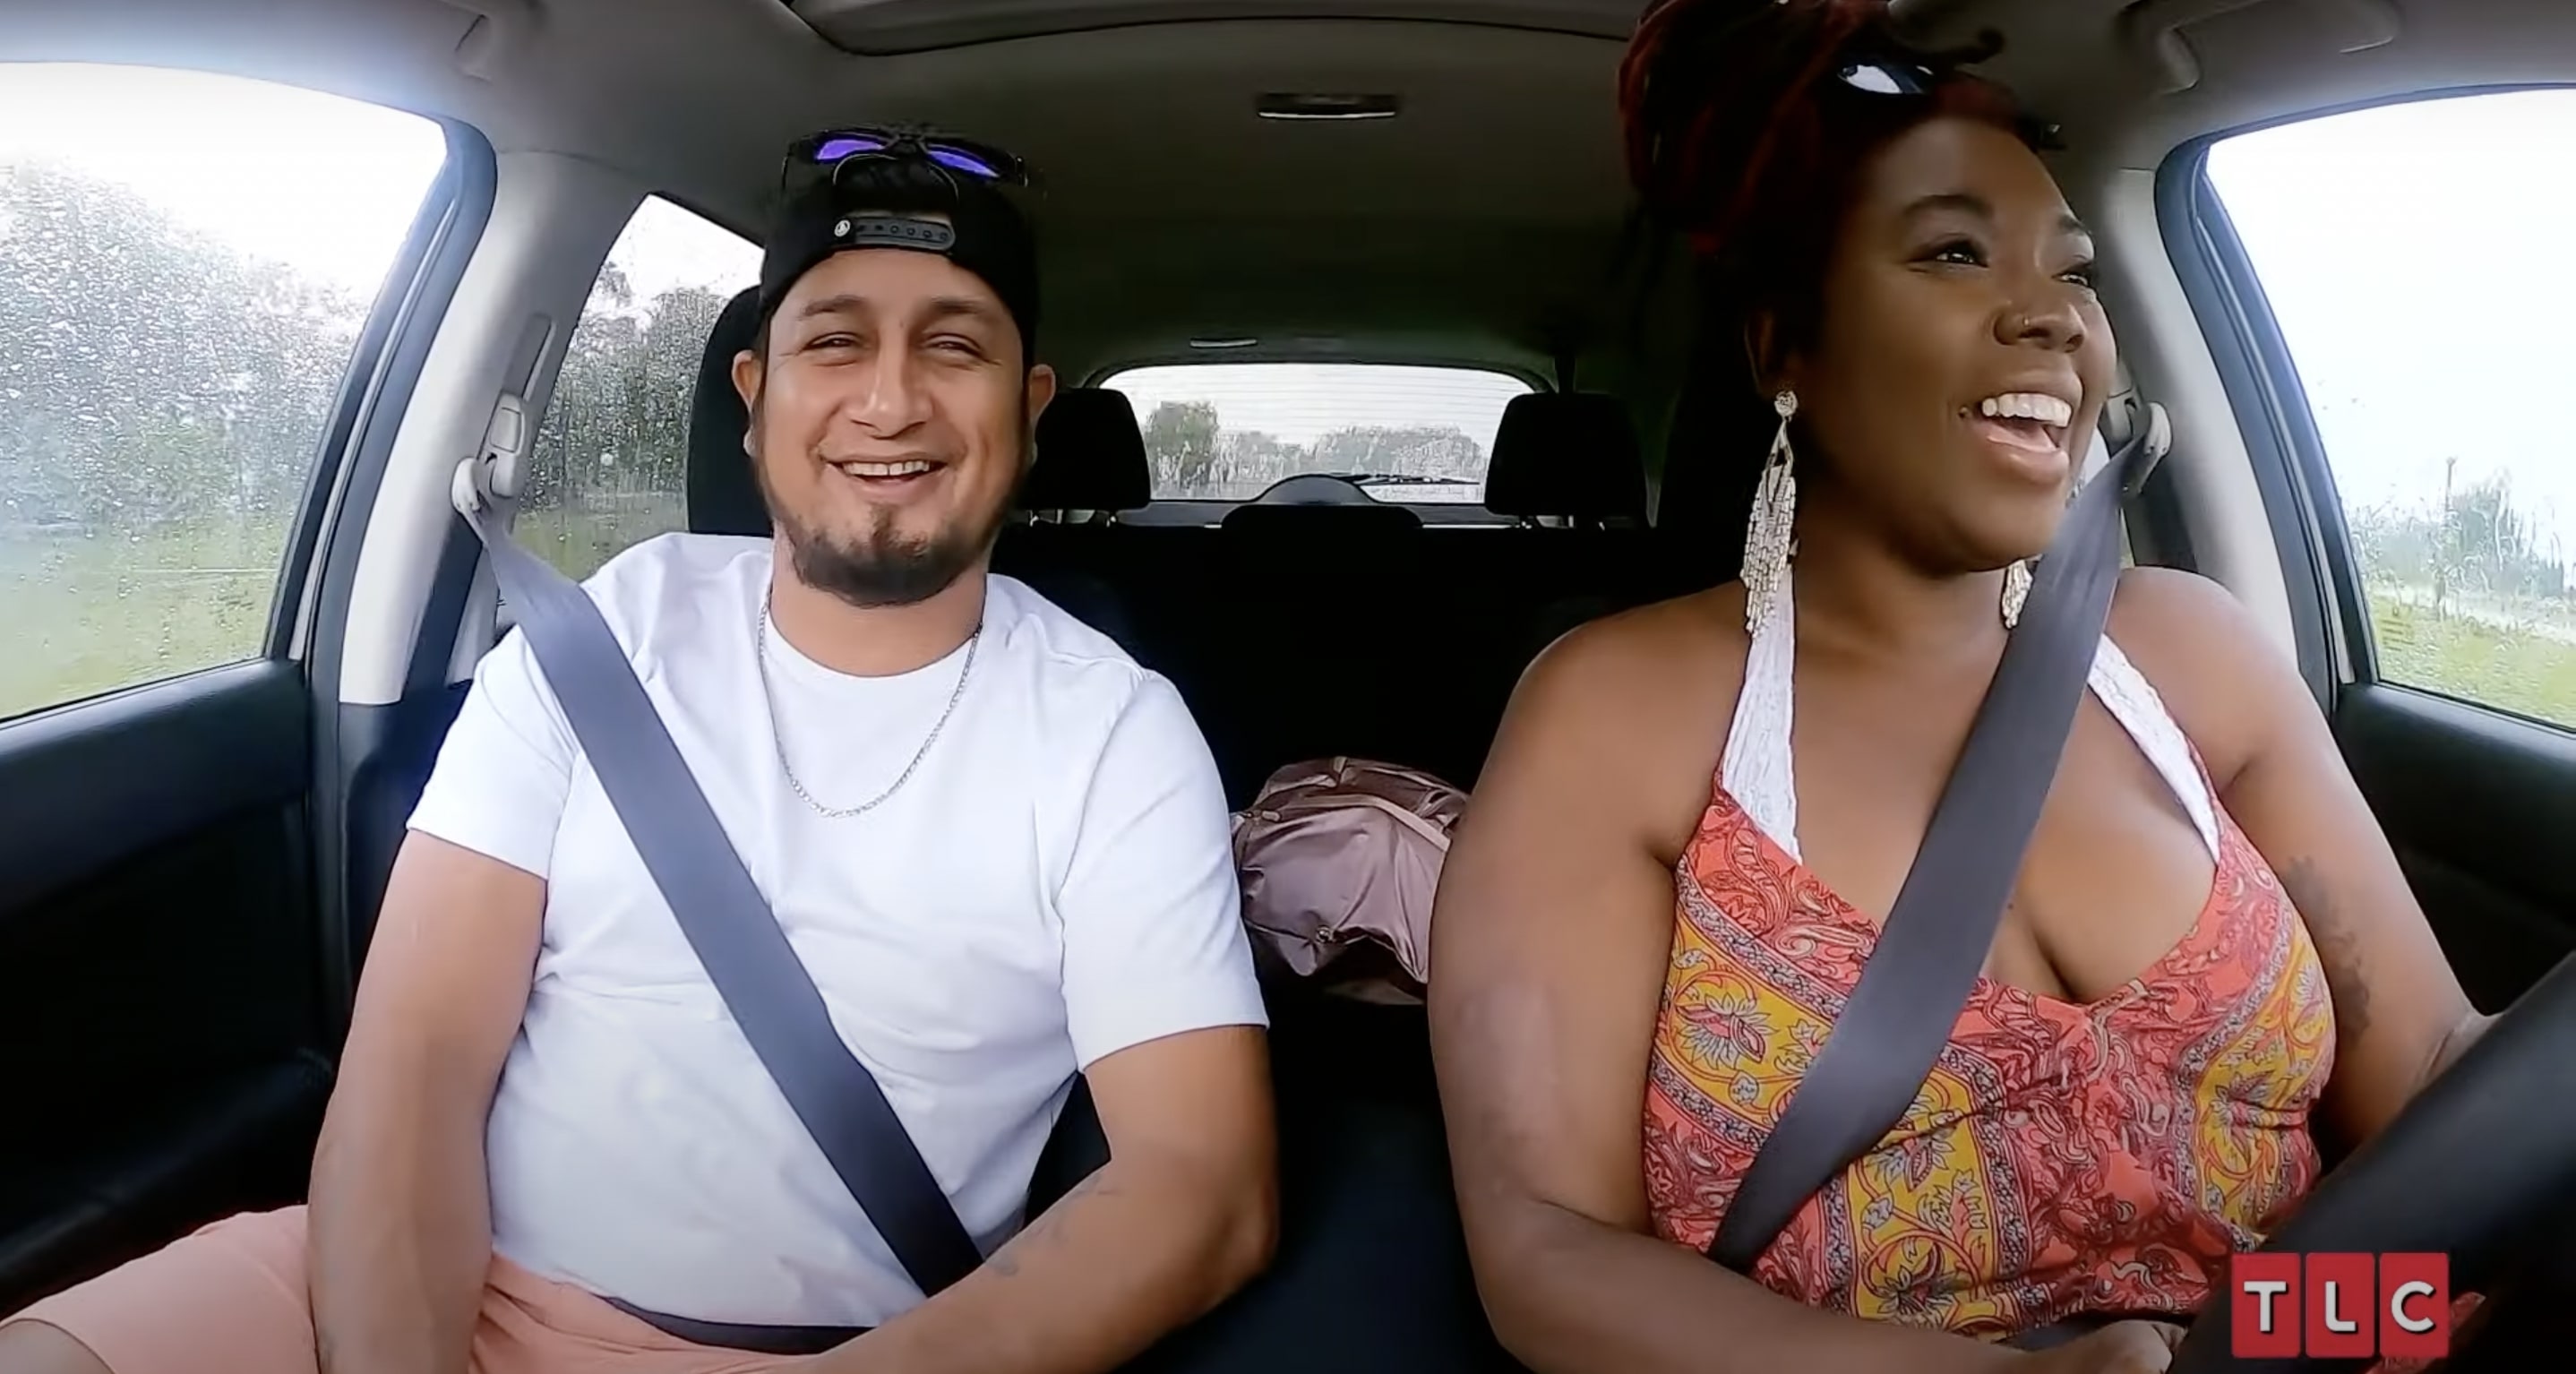 '90 Day Fiance' Season 10 Couples Faced Many Ups and Downs: Who Are Still Together?